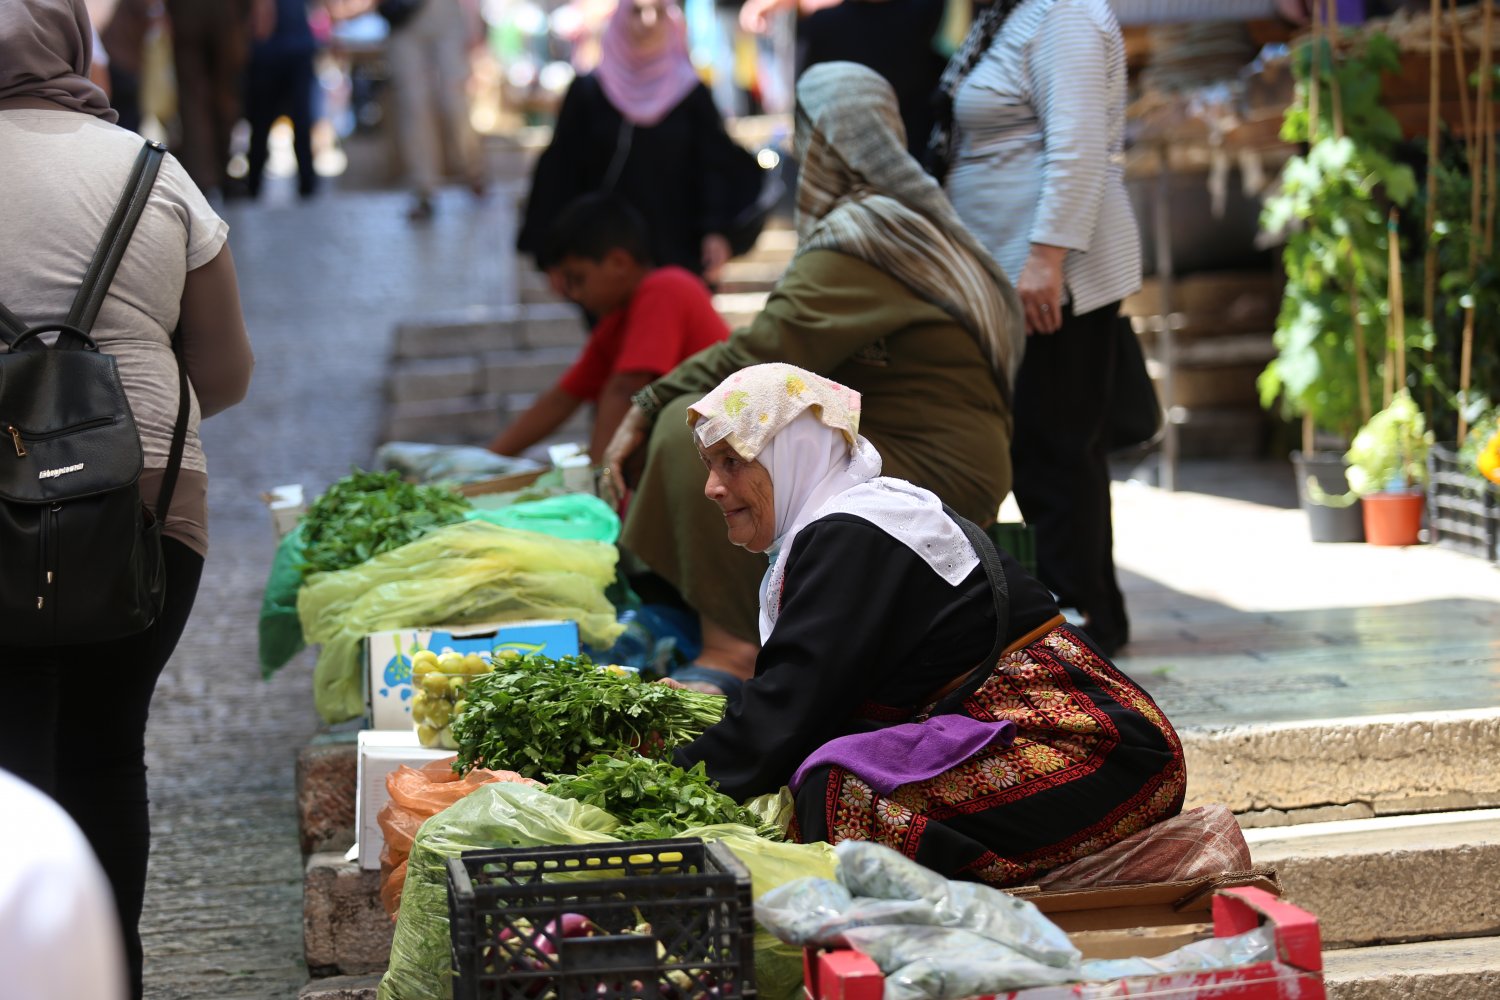 A Palestinian villager sells produce in the Old City of Jerusalem, June 2021.